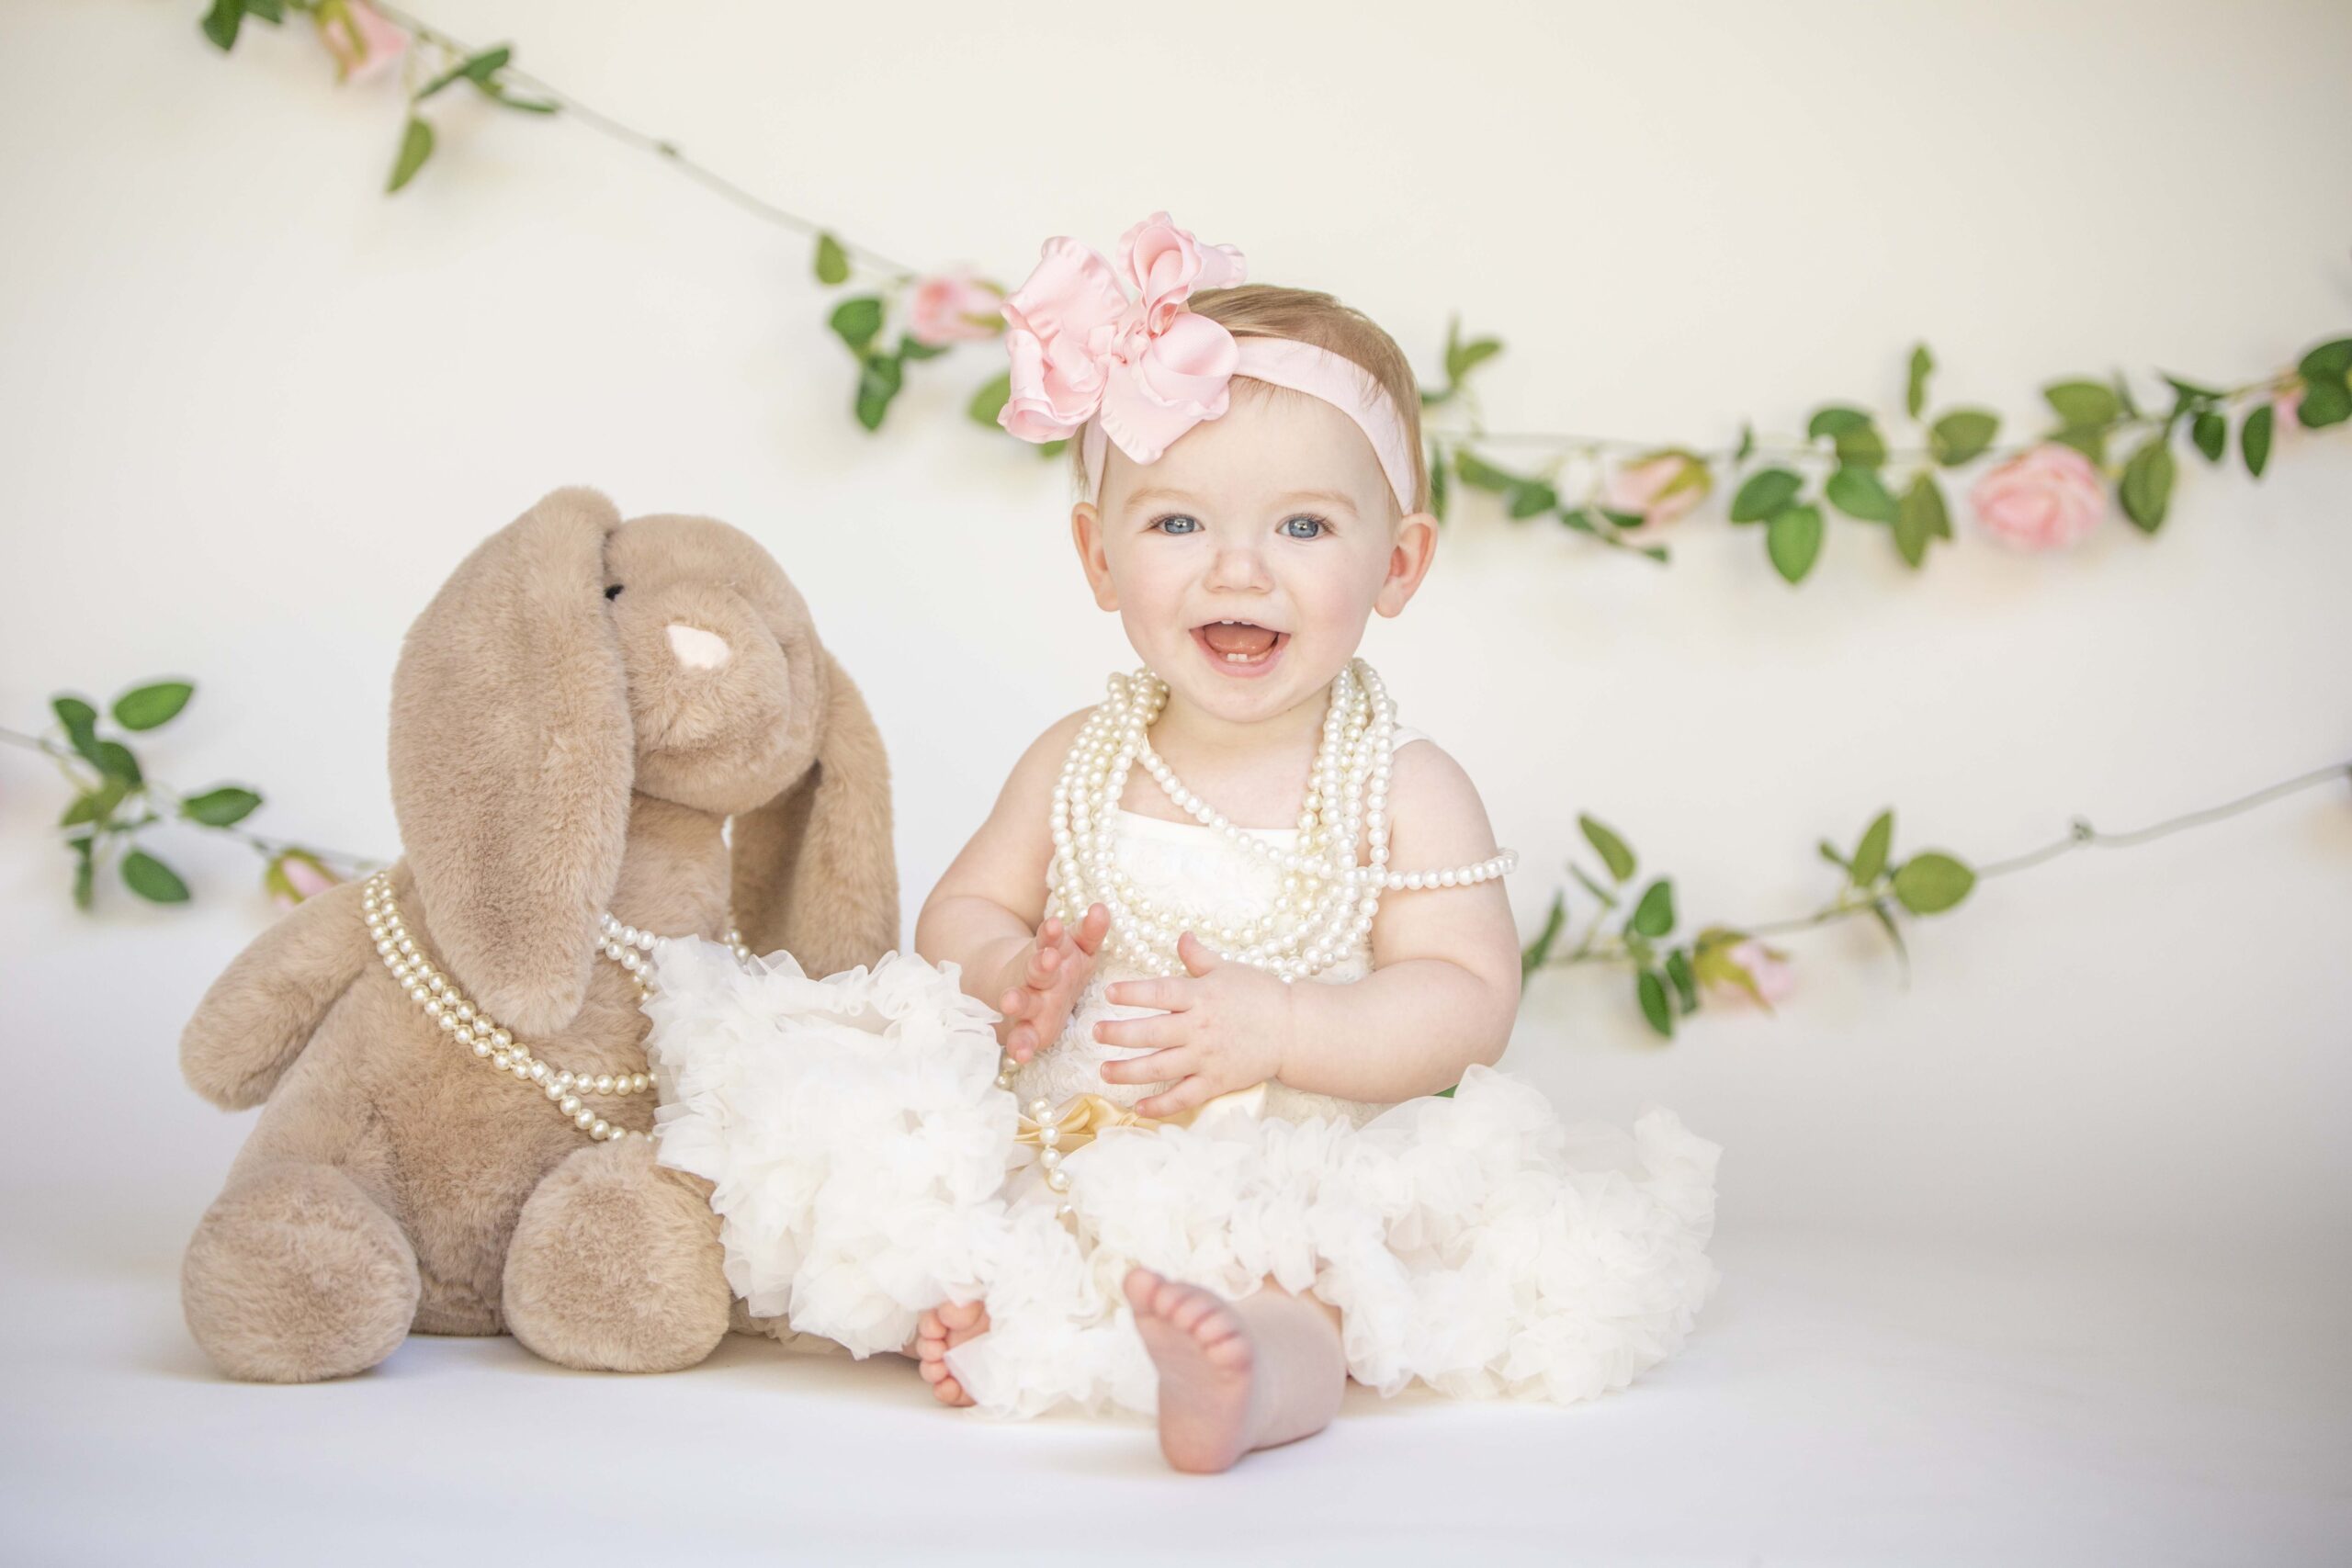 One year old girl sitting with her bunny in front of a floral garland